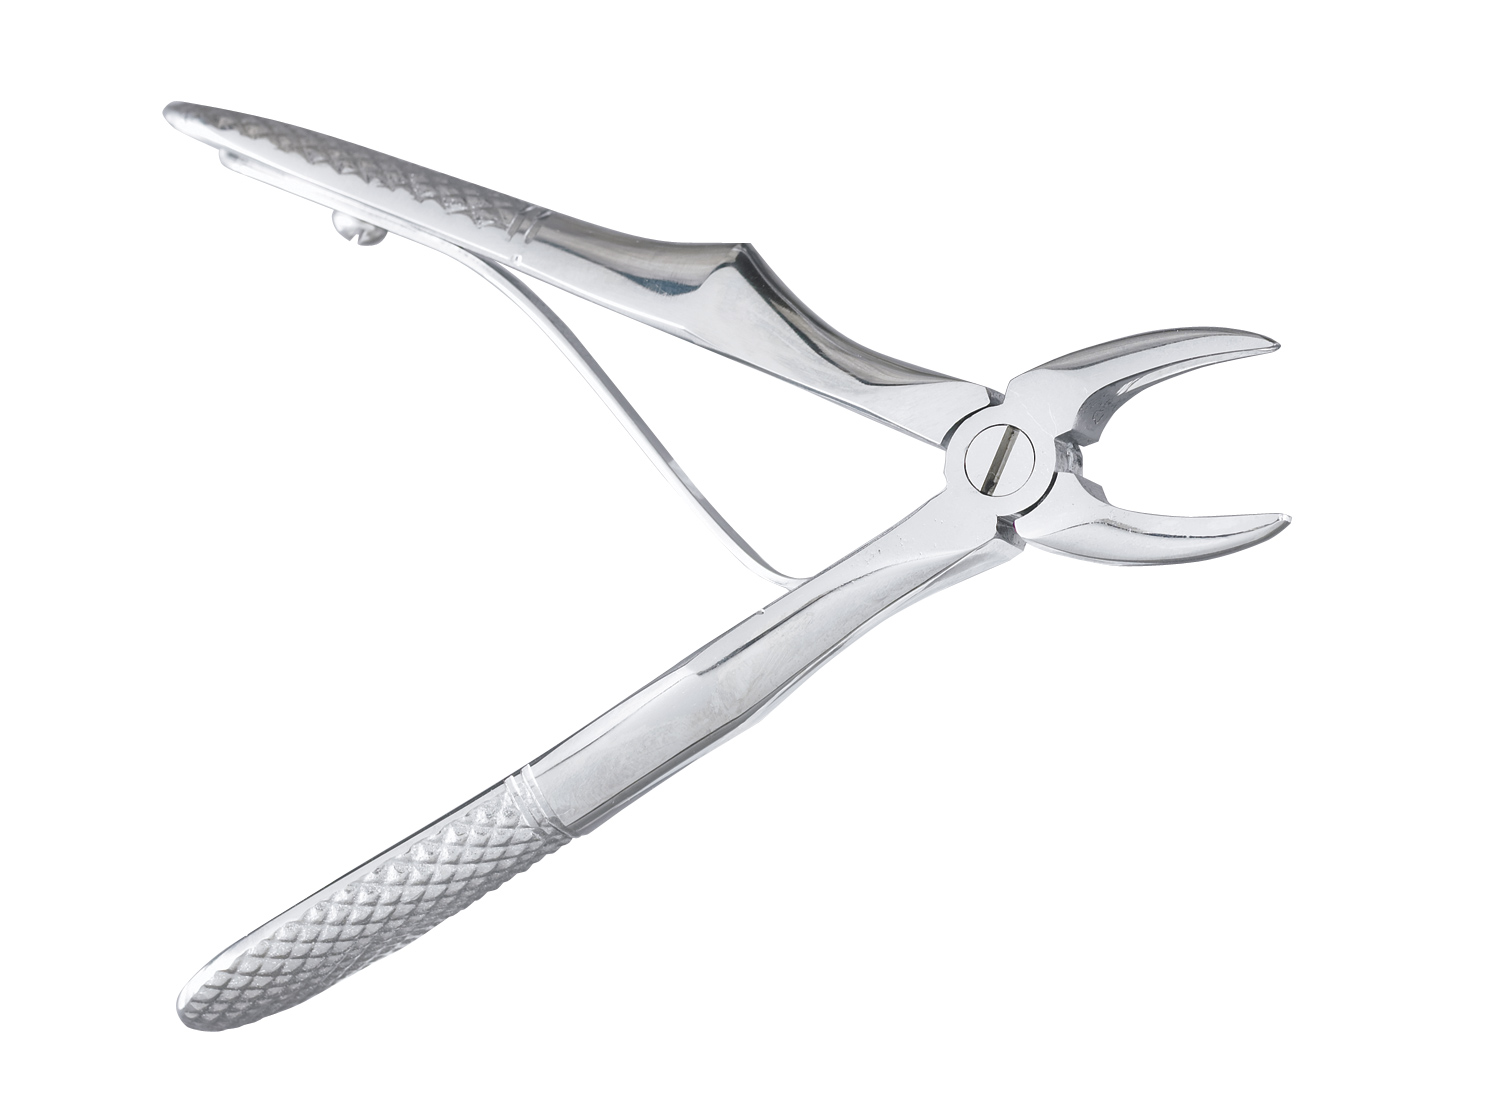 e-childrens-tooth-extracting-forceps-defe-miltex.jpg